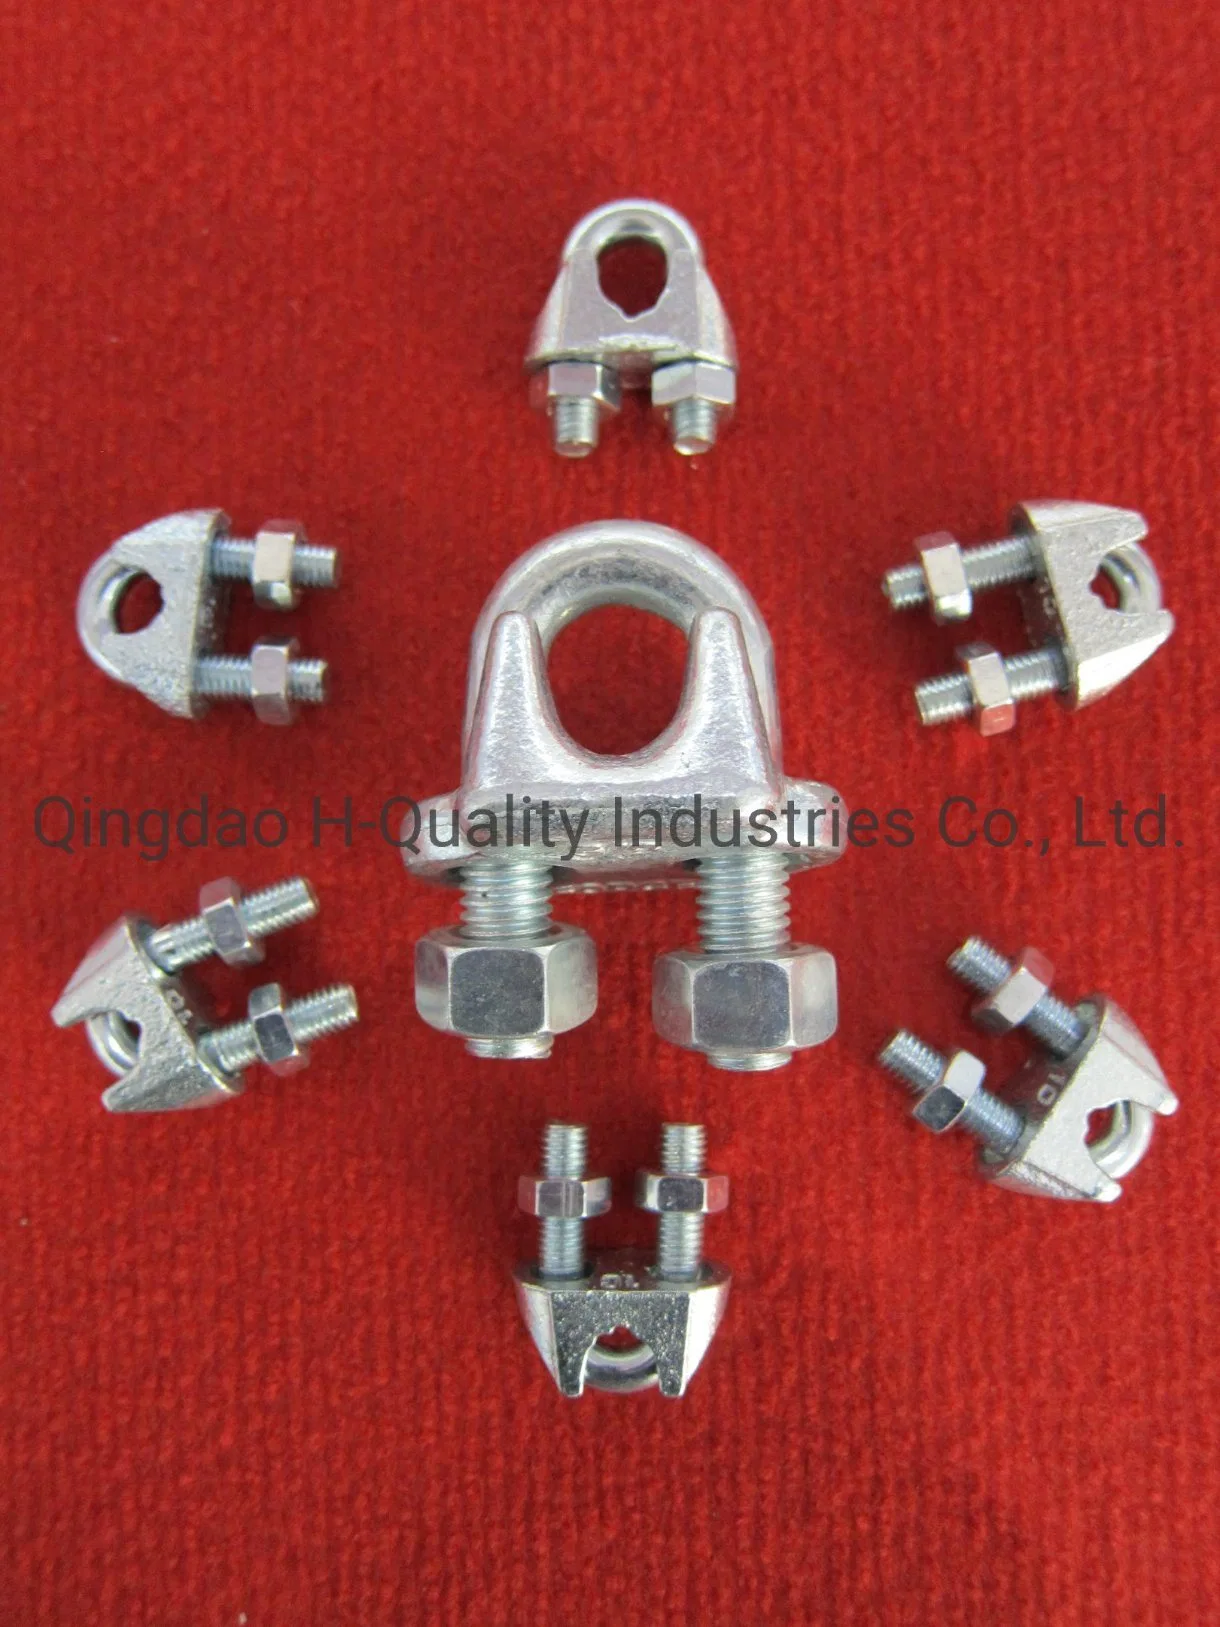 Rigging Hardware BS462, Malleable Wire Rope Clip, Hot DIP Galvanized or Zinc Plated